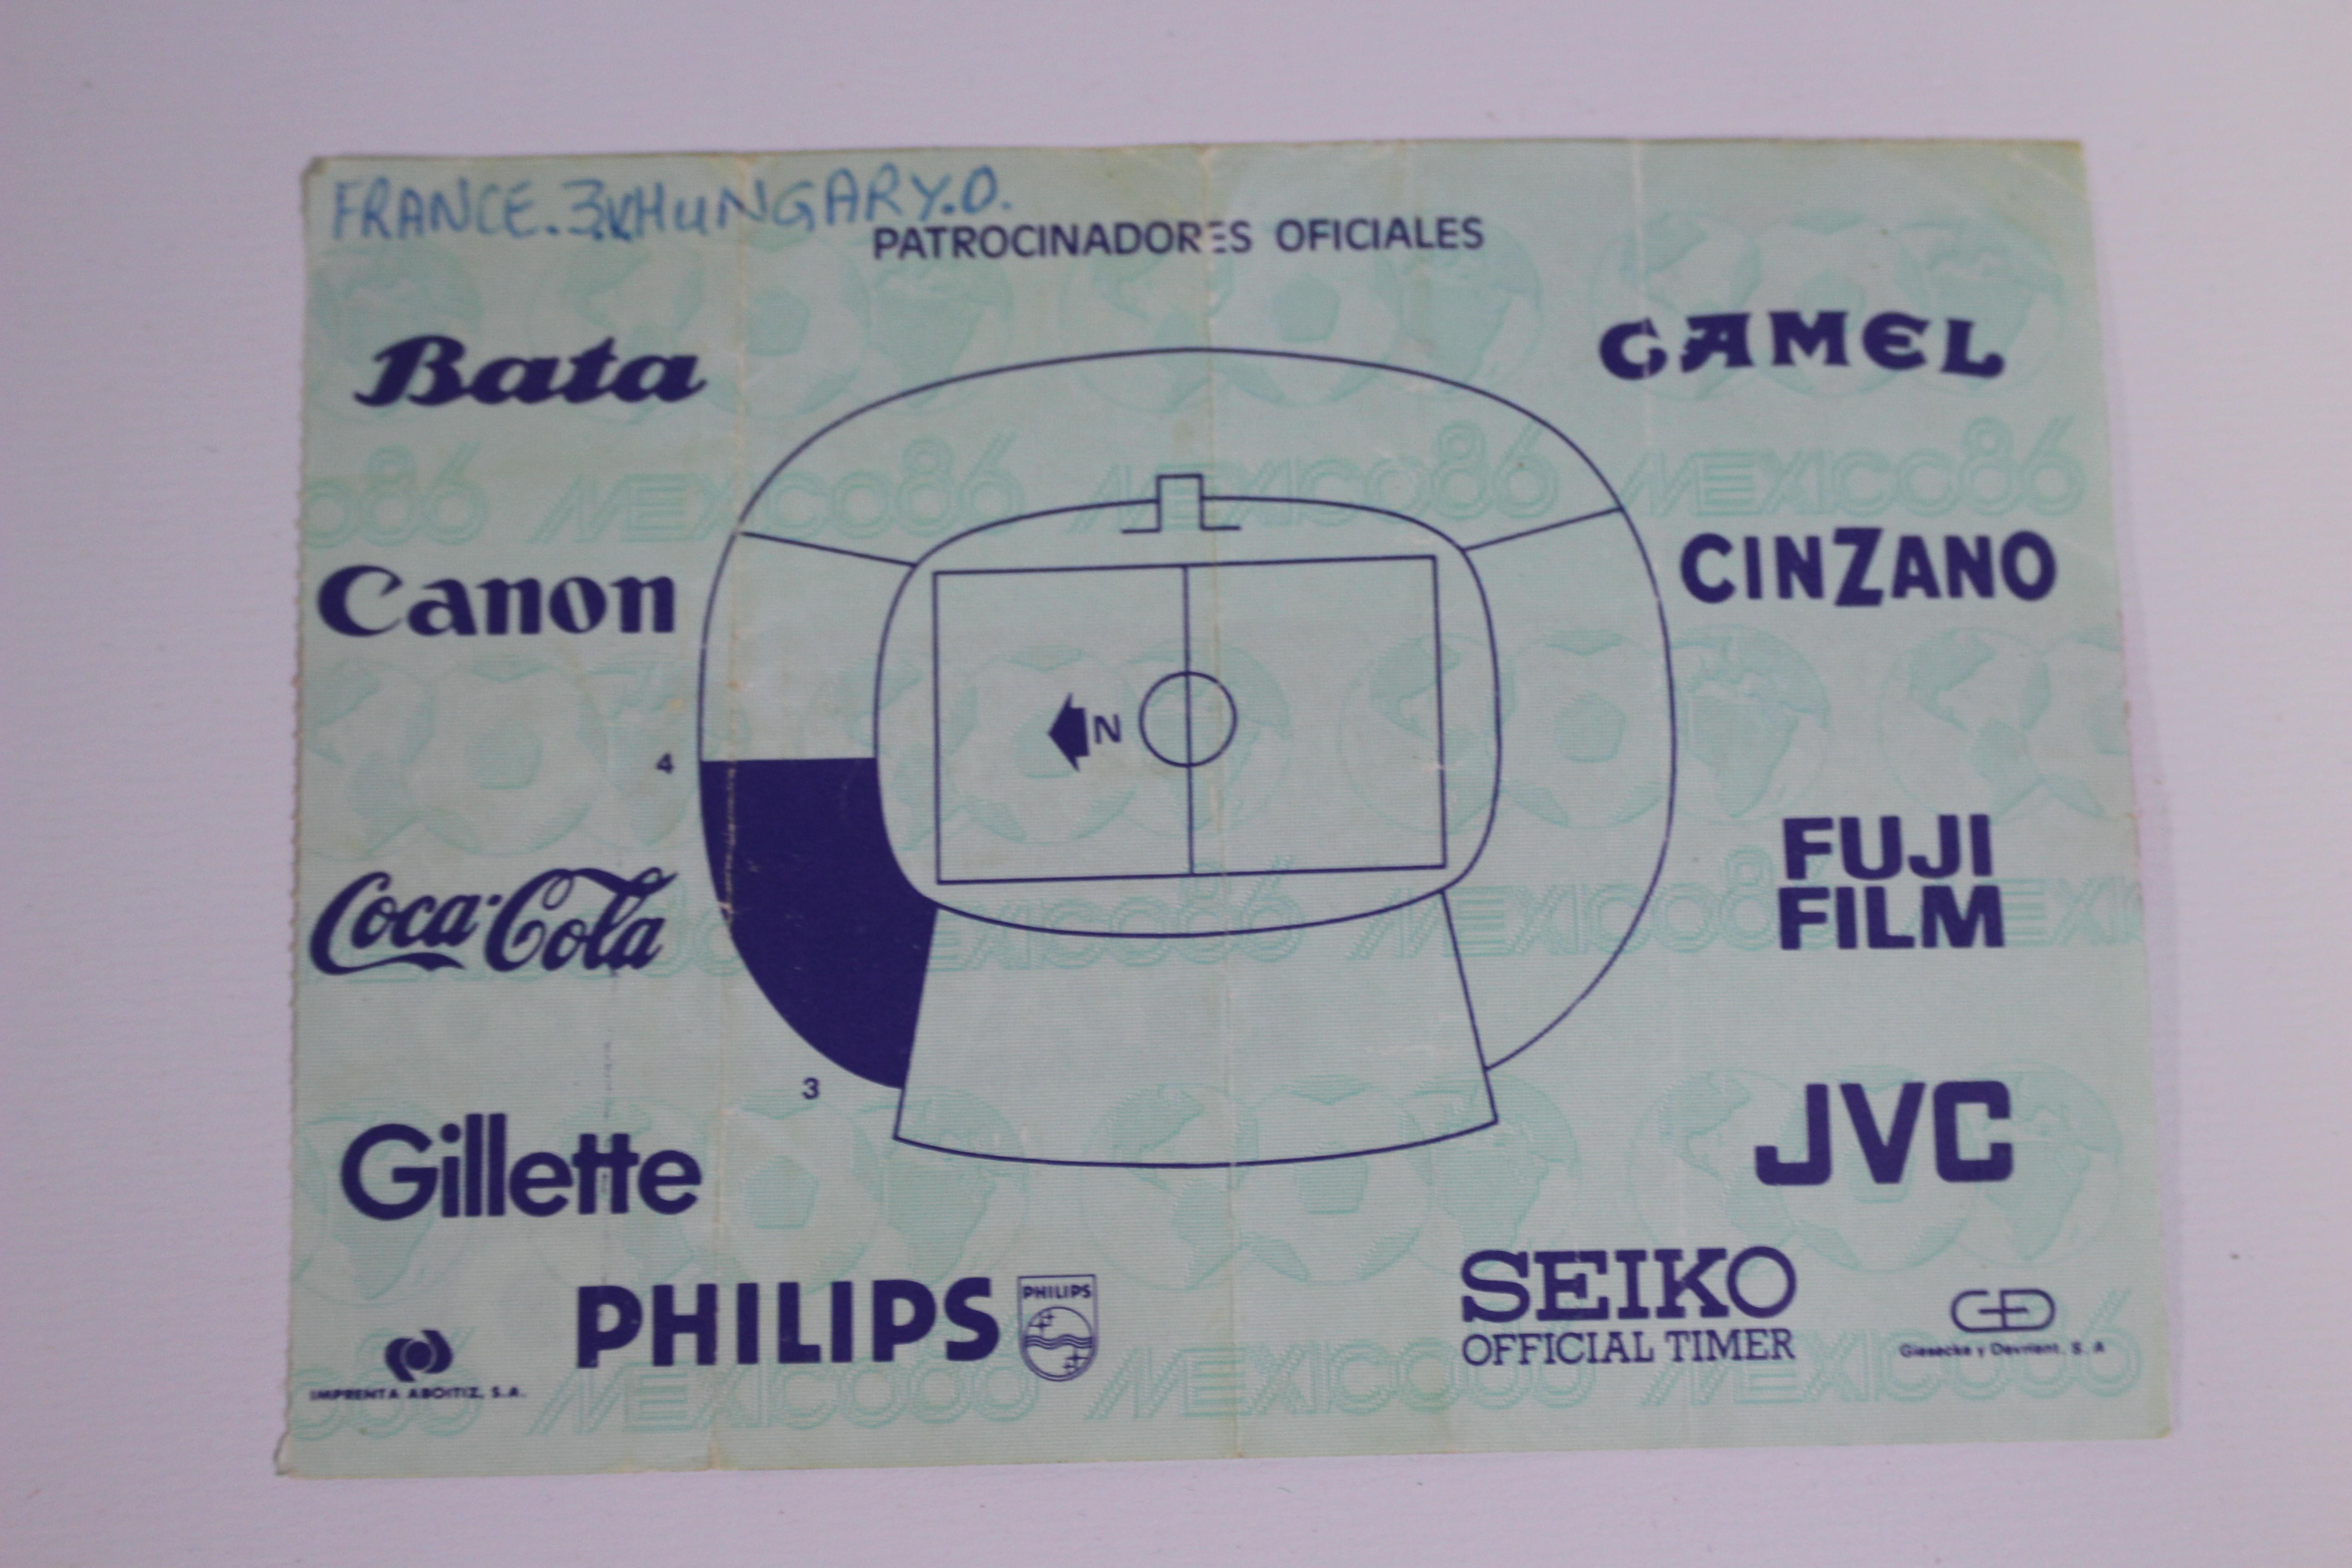 World Cup Football Ticket, Mexico 86 Hun - Image 2 of 2